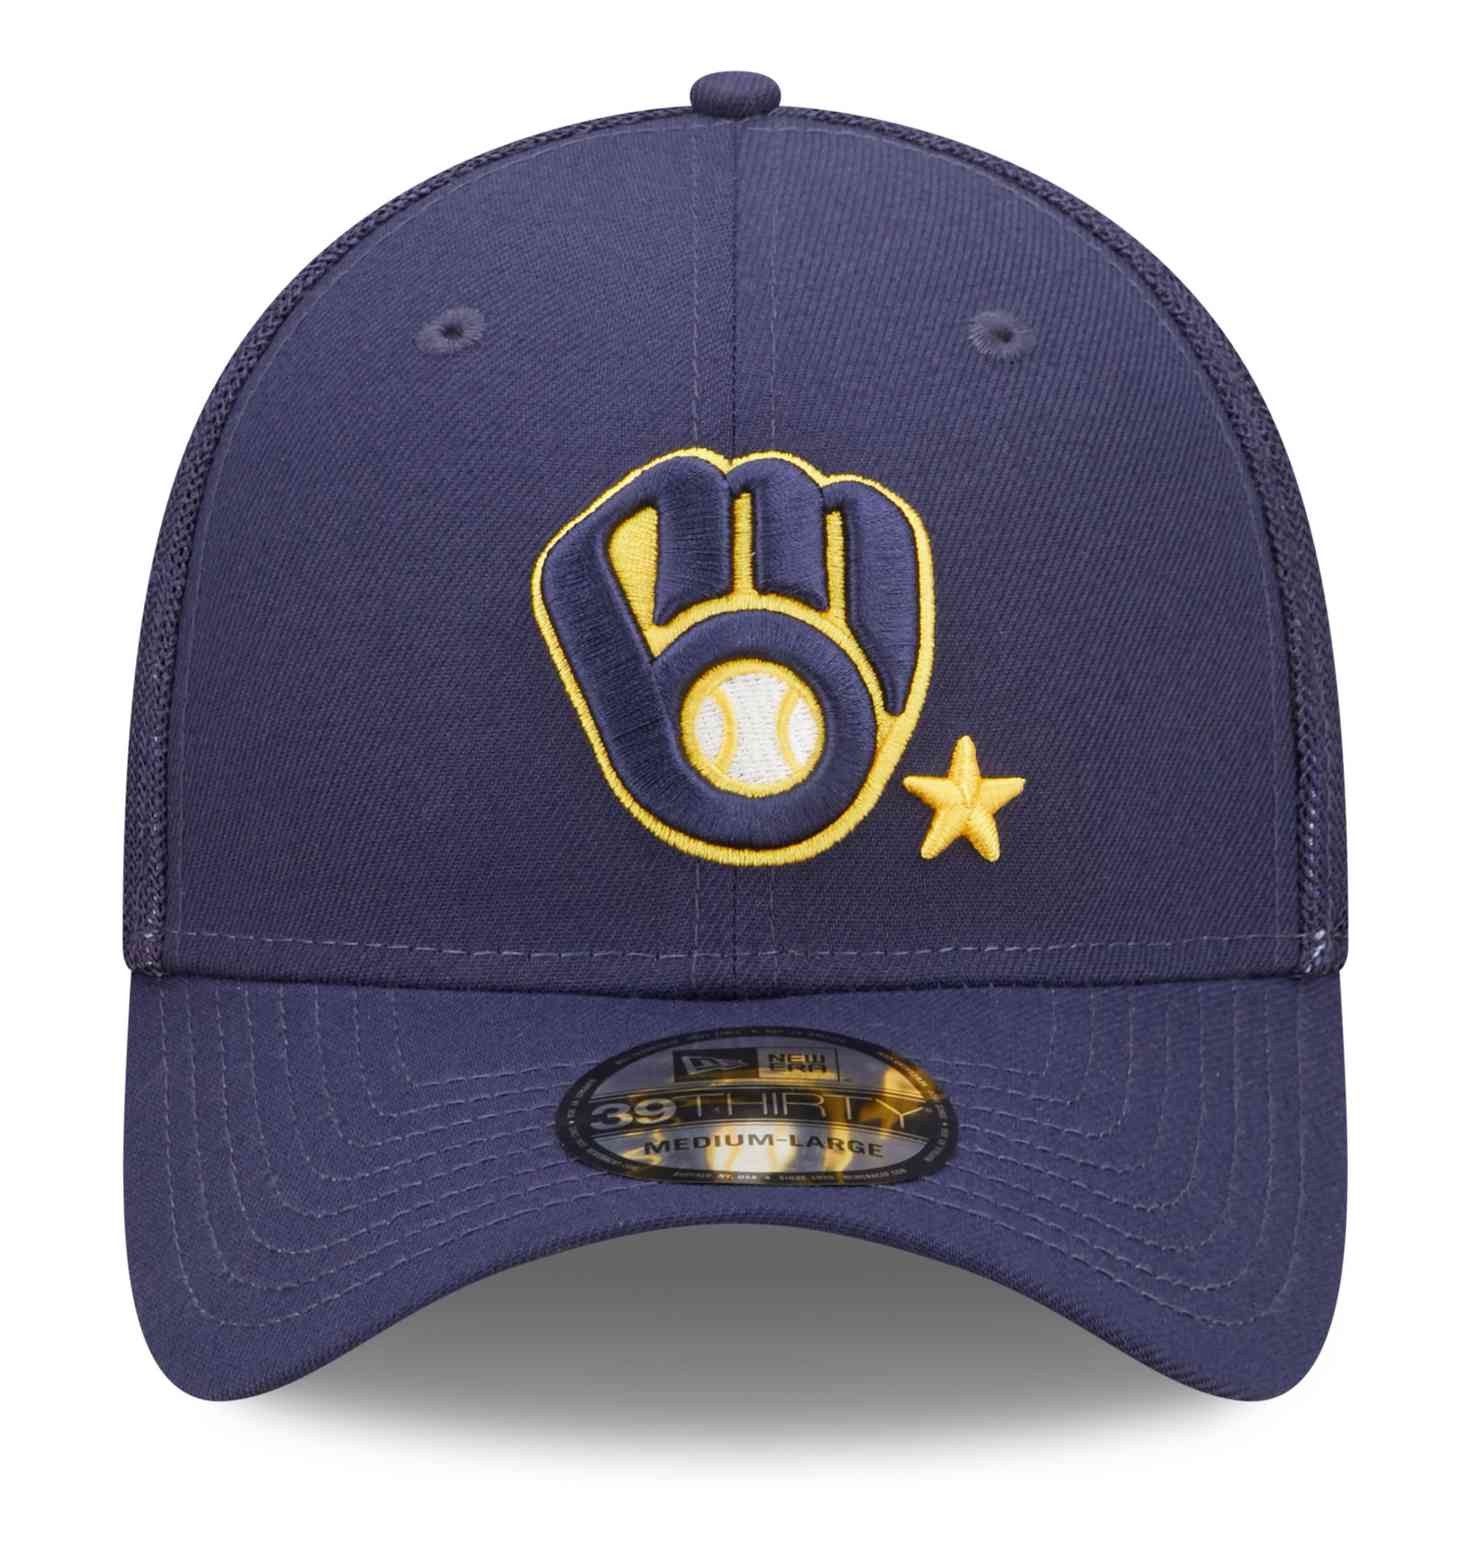 New Era - MLB Milwaukee Brewers All Star Game Patch 39Thirty